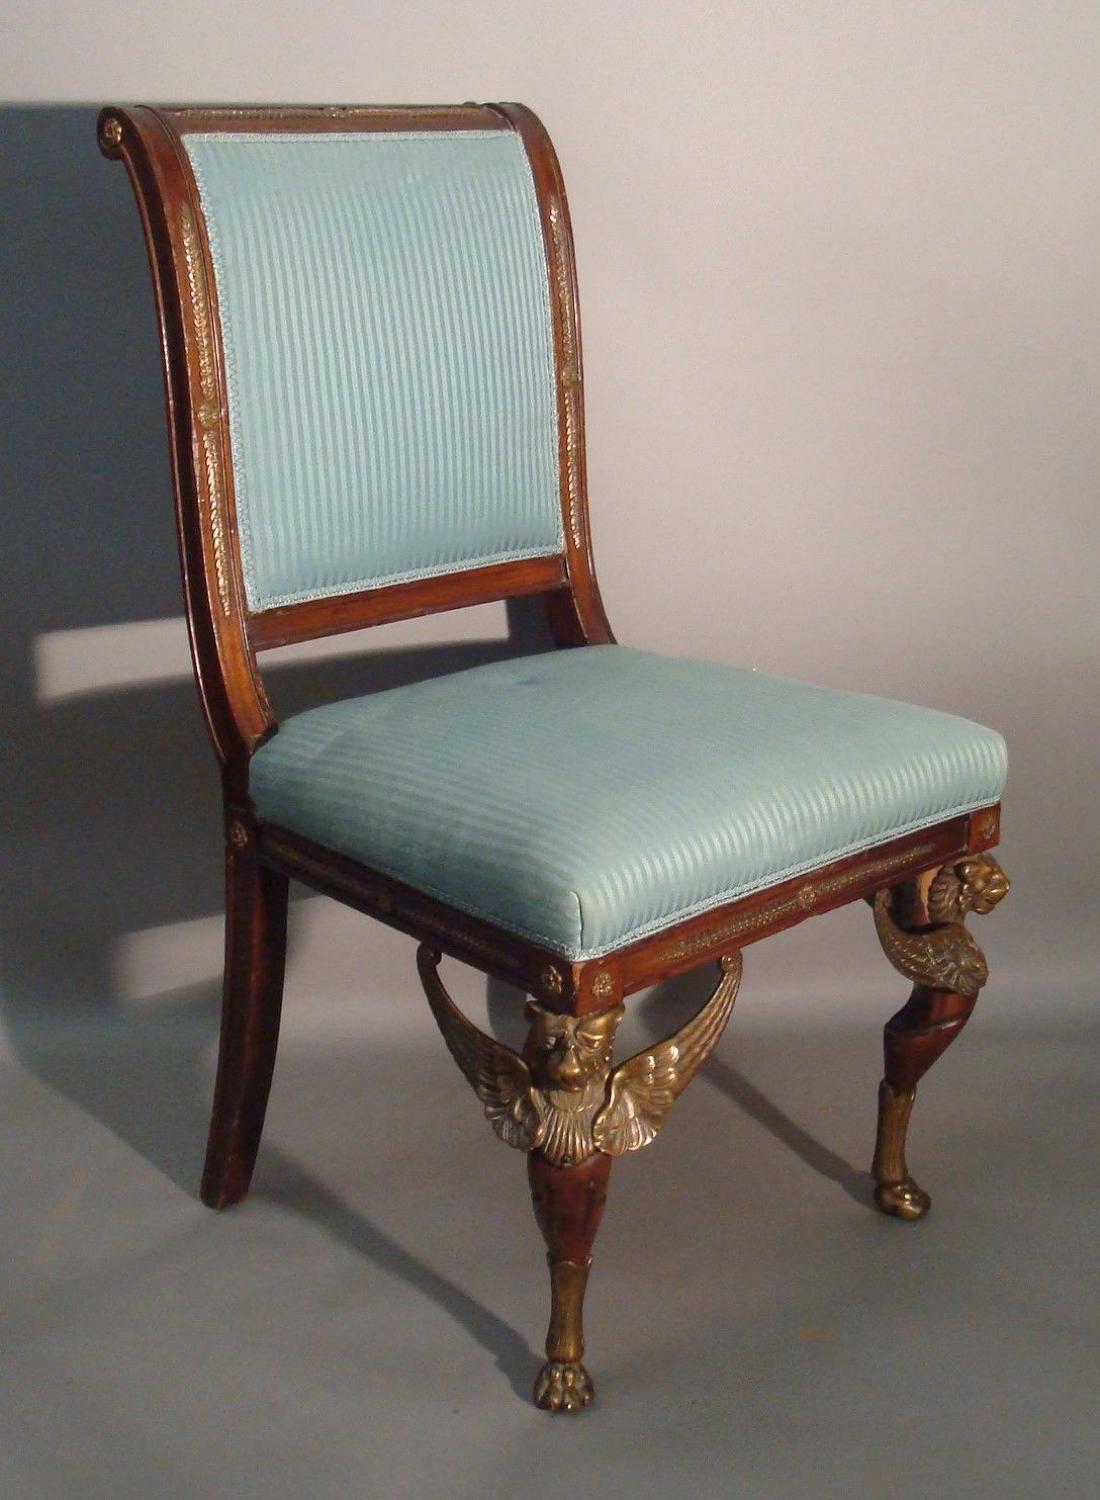 19th century side chair